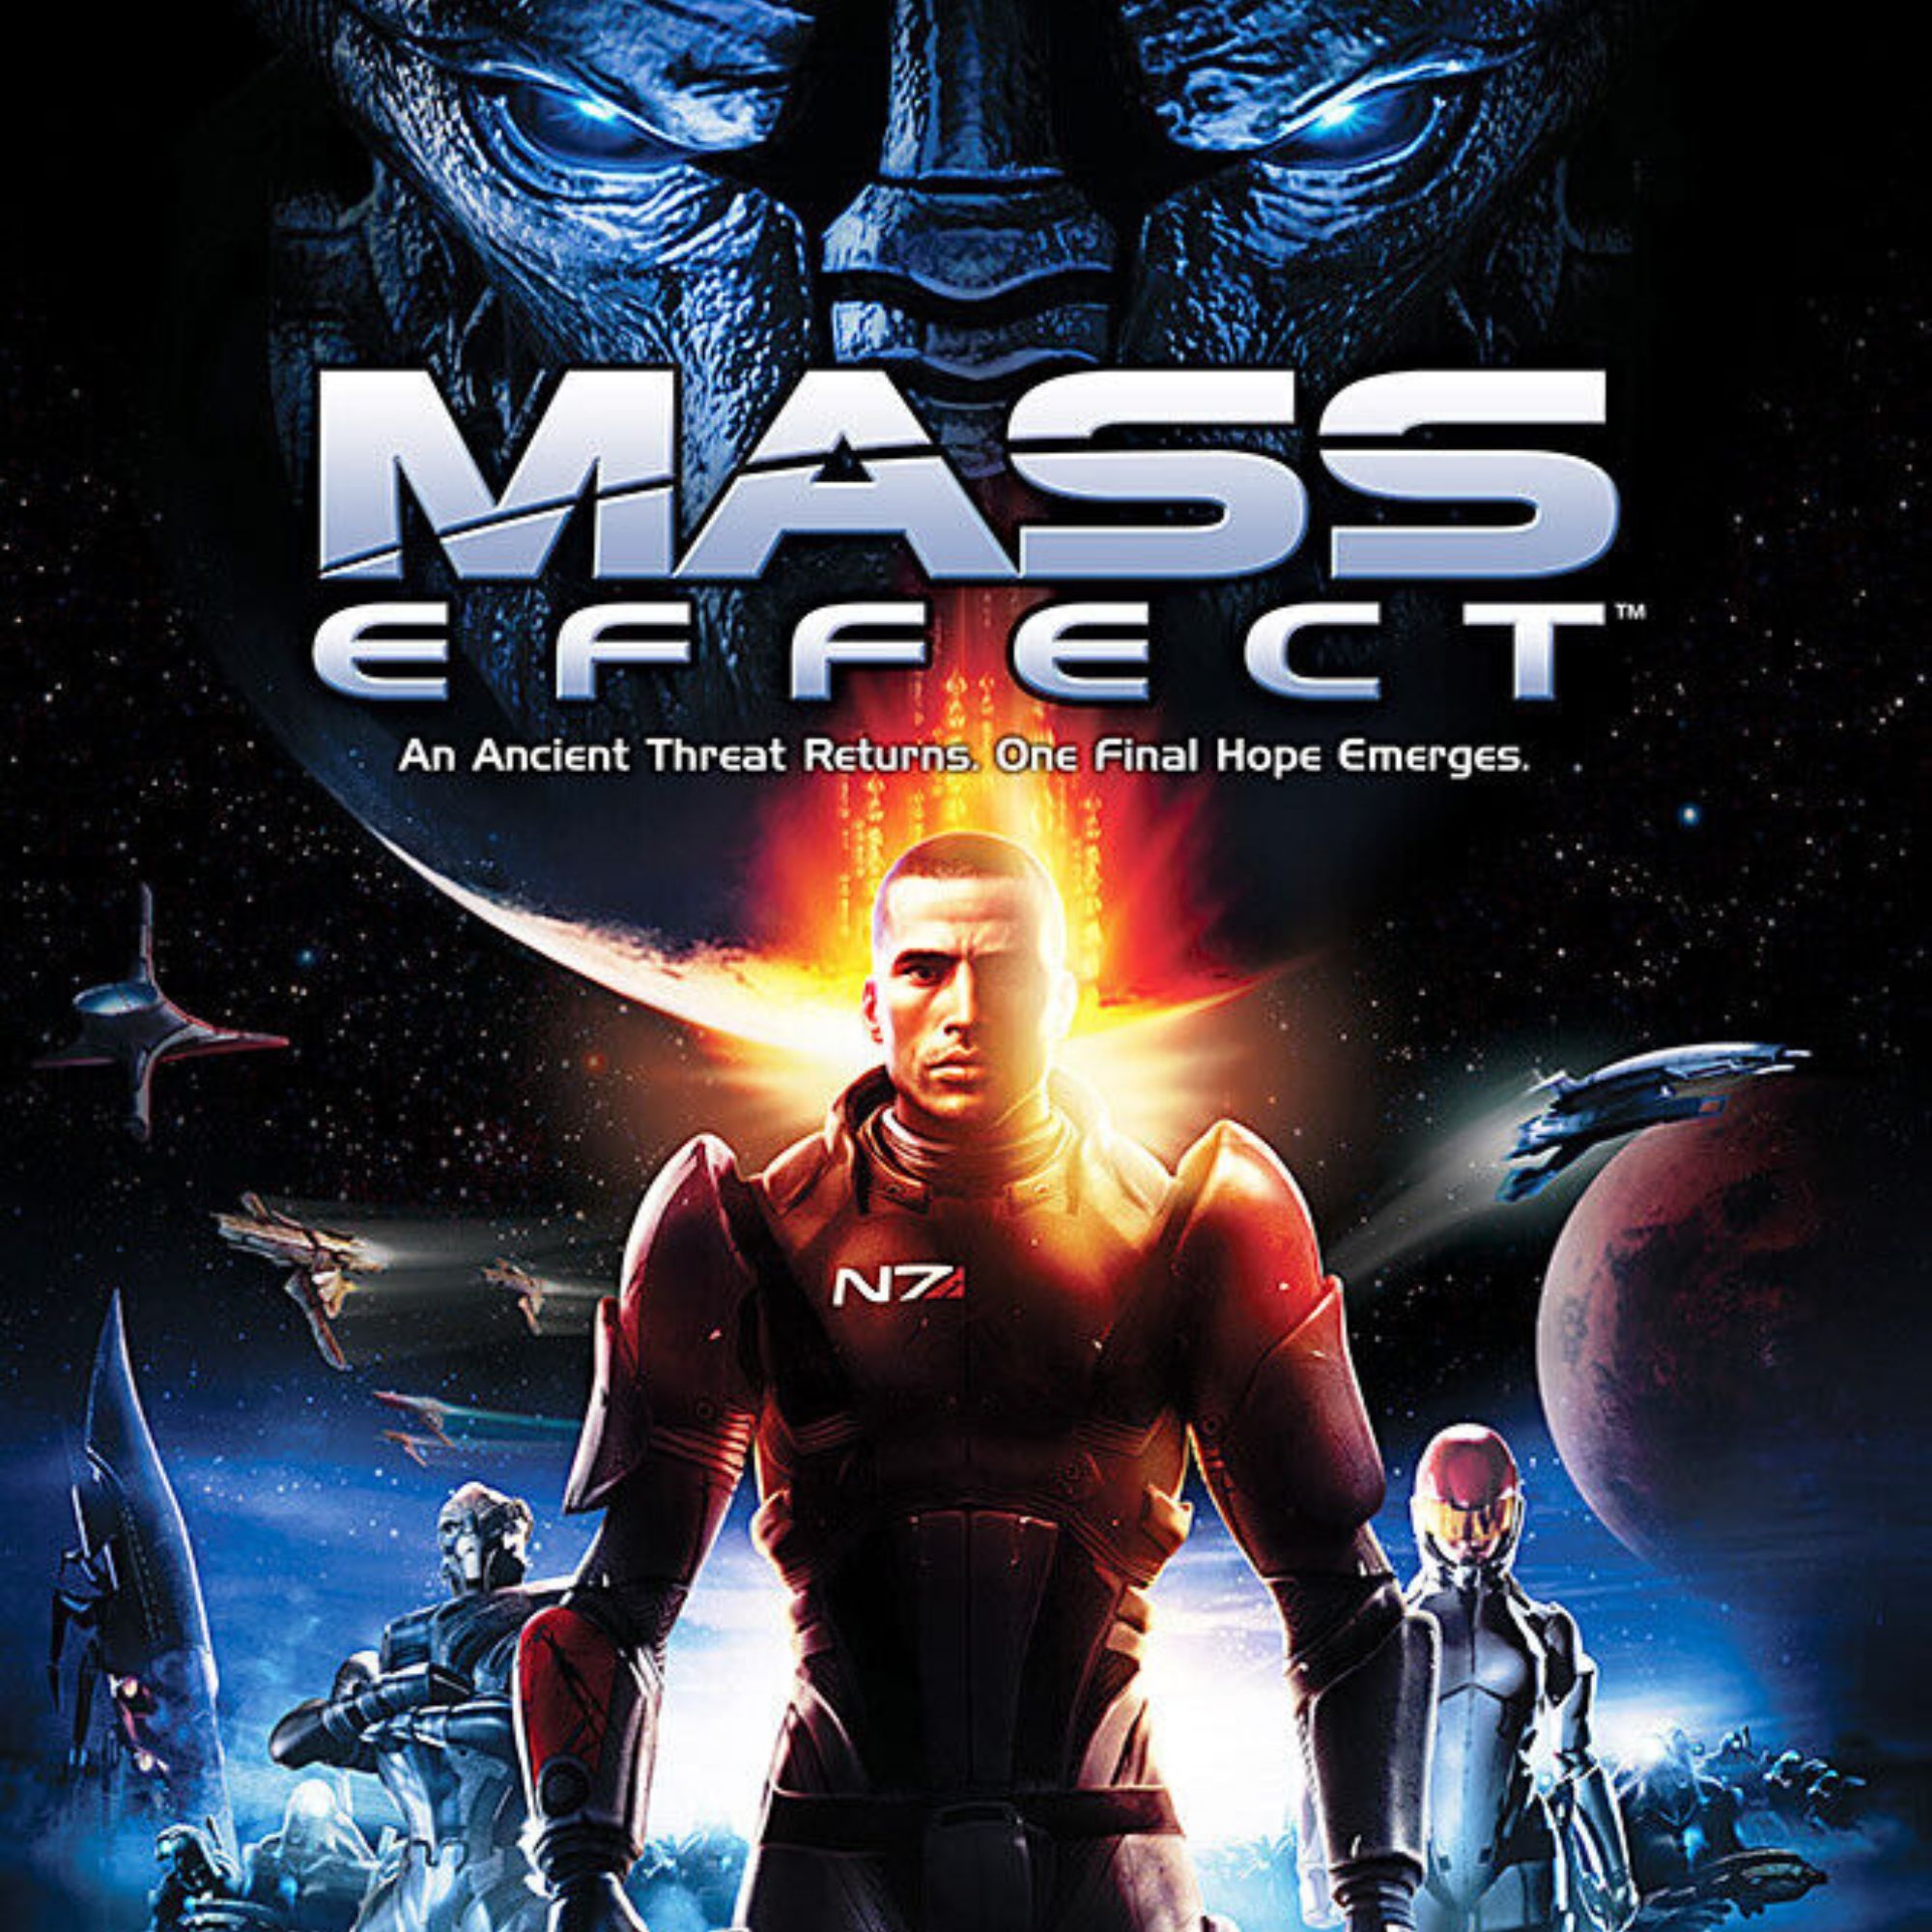 2000x2000 tag image for Mass Effect. A man dressed in a spacesuit leads robots in space.